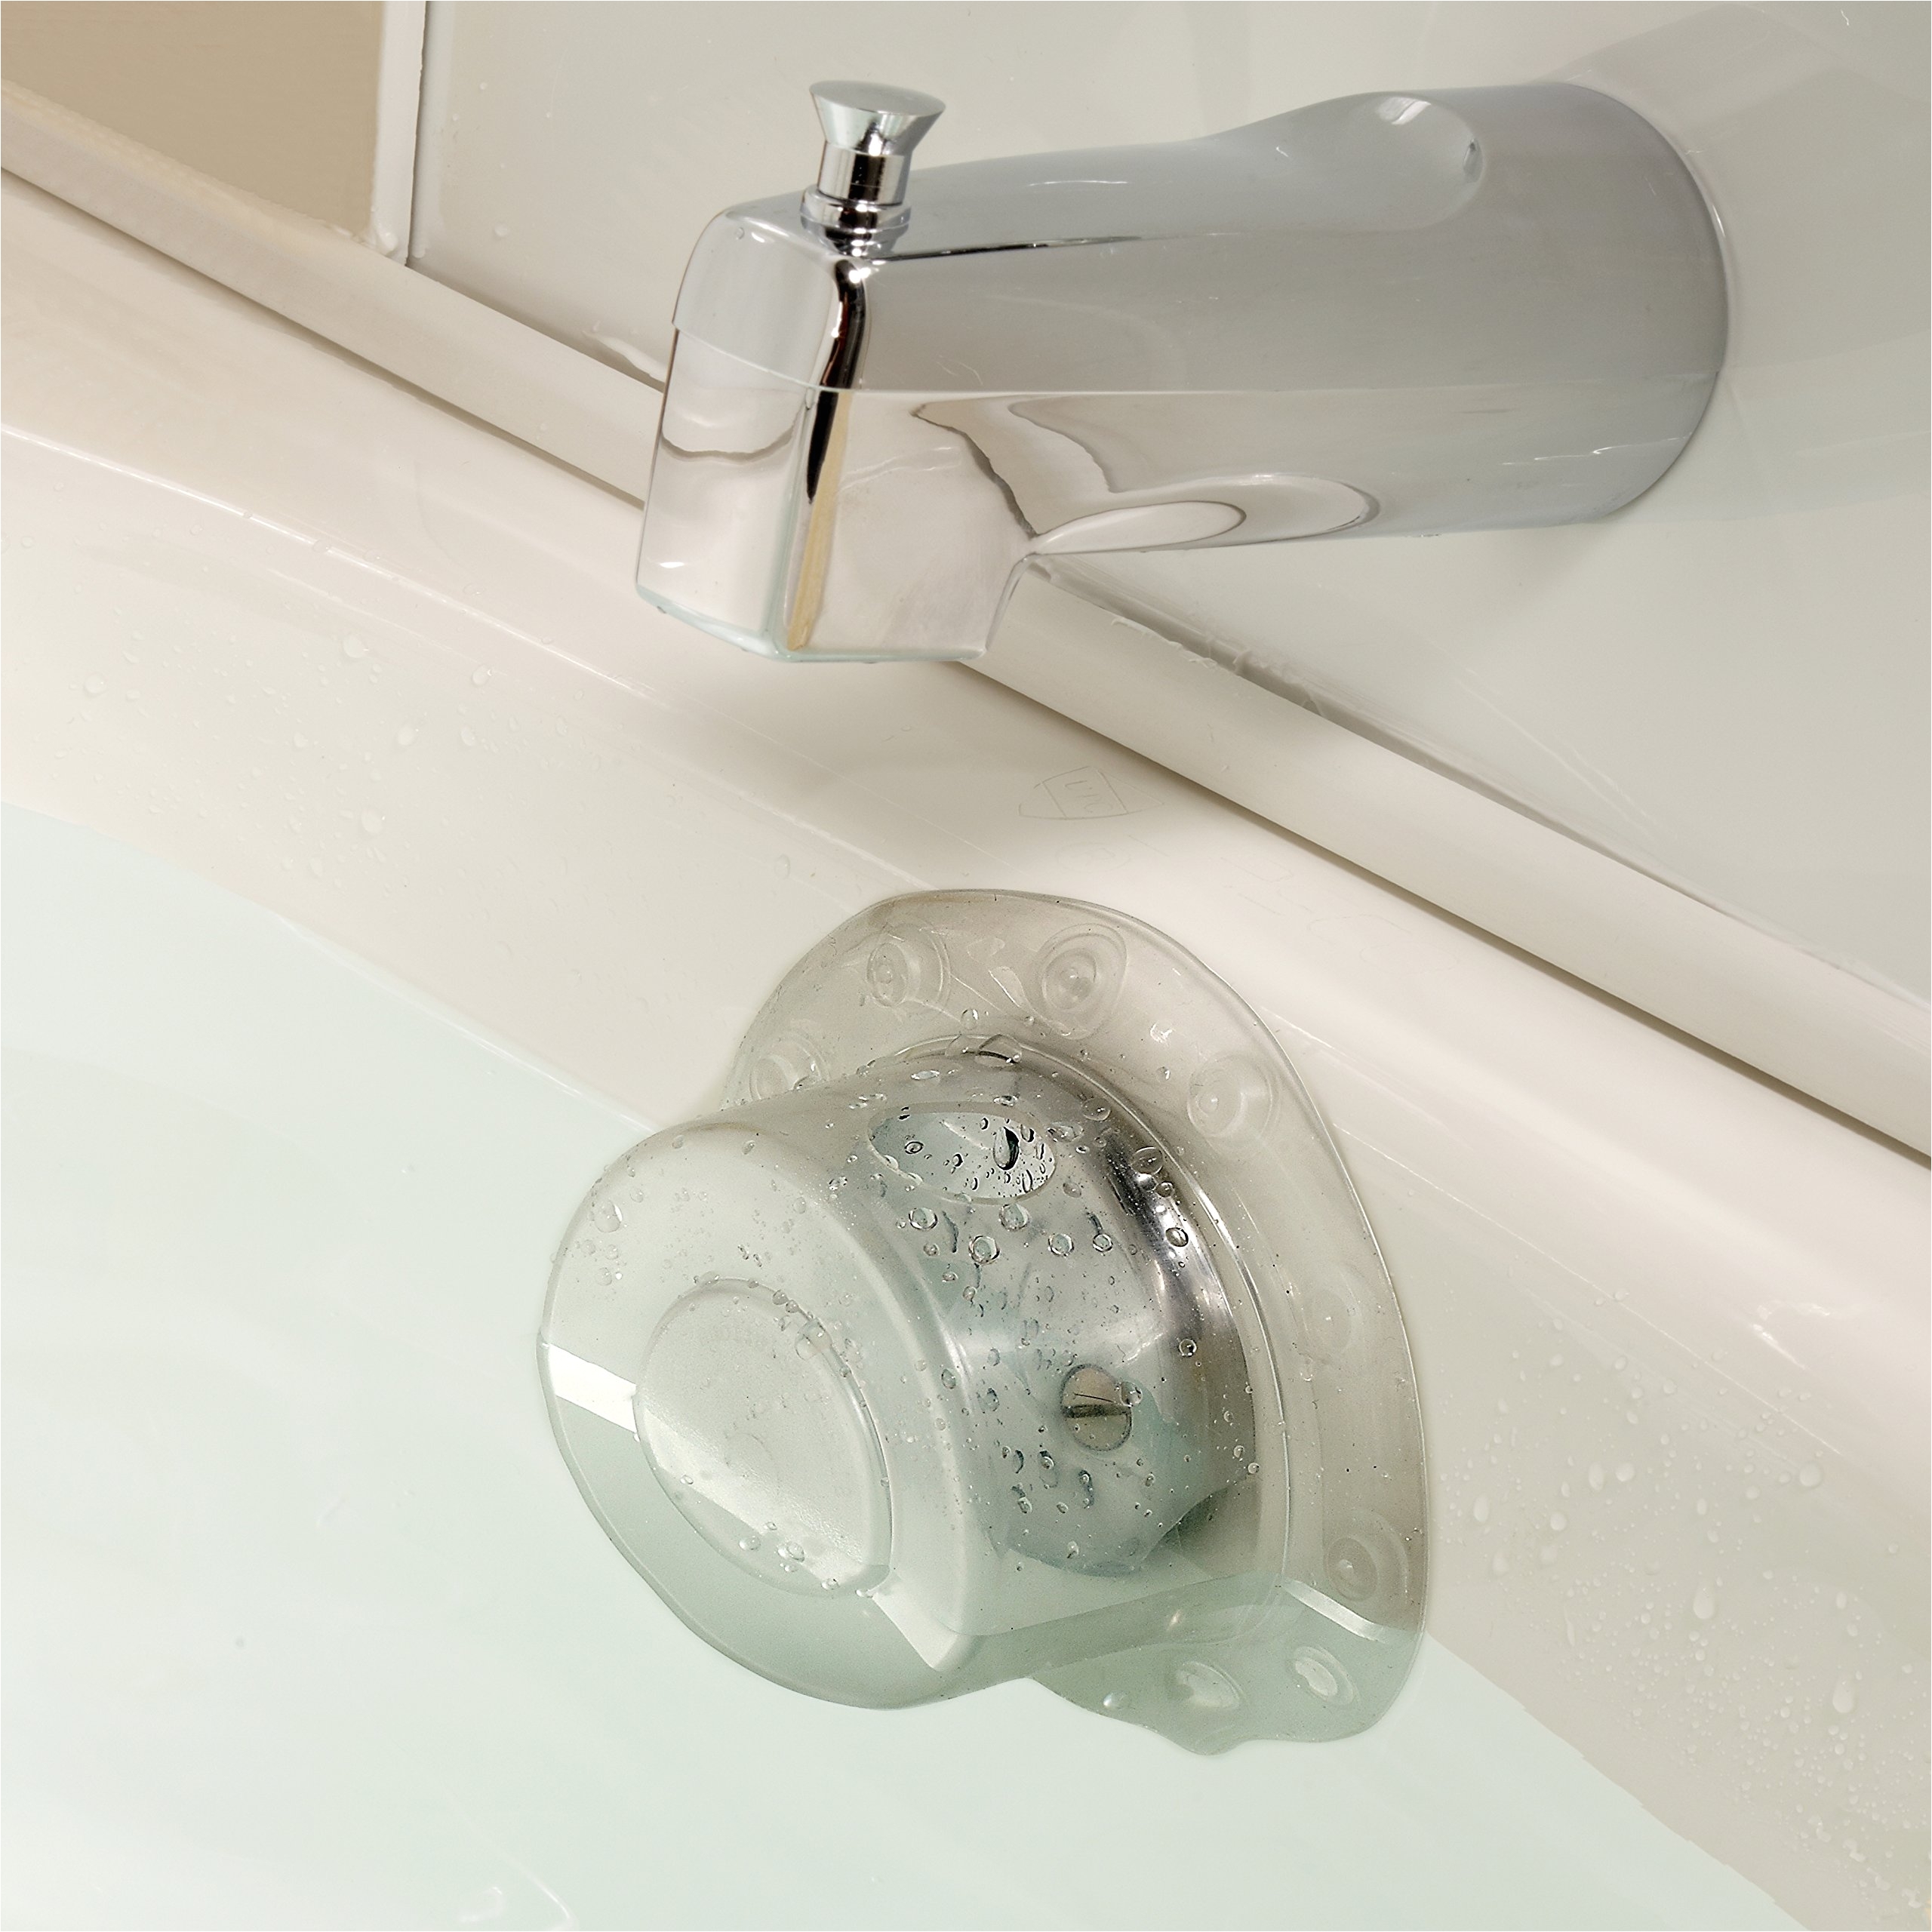 slipx solutions bottomless bath overflow drain cover adds inches of water to tub for warmer